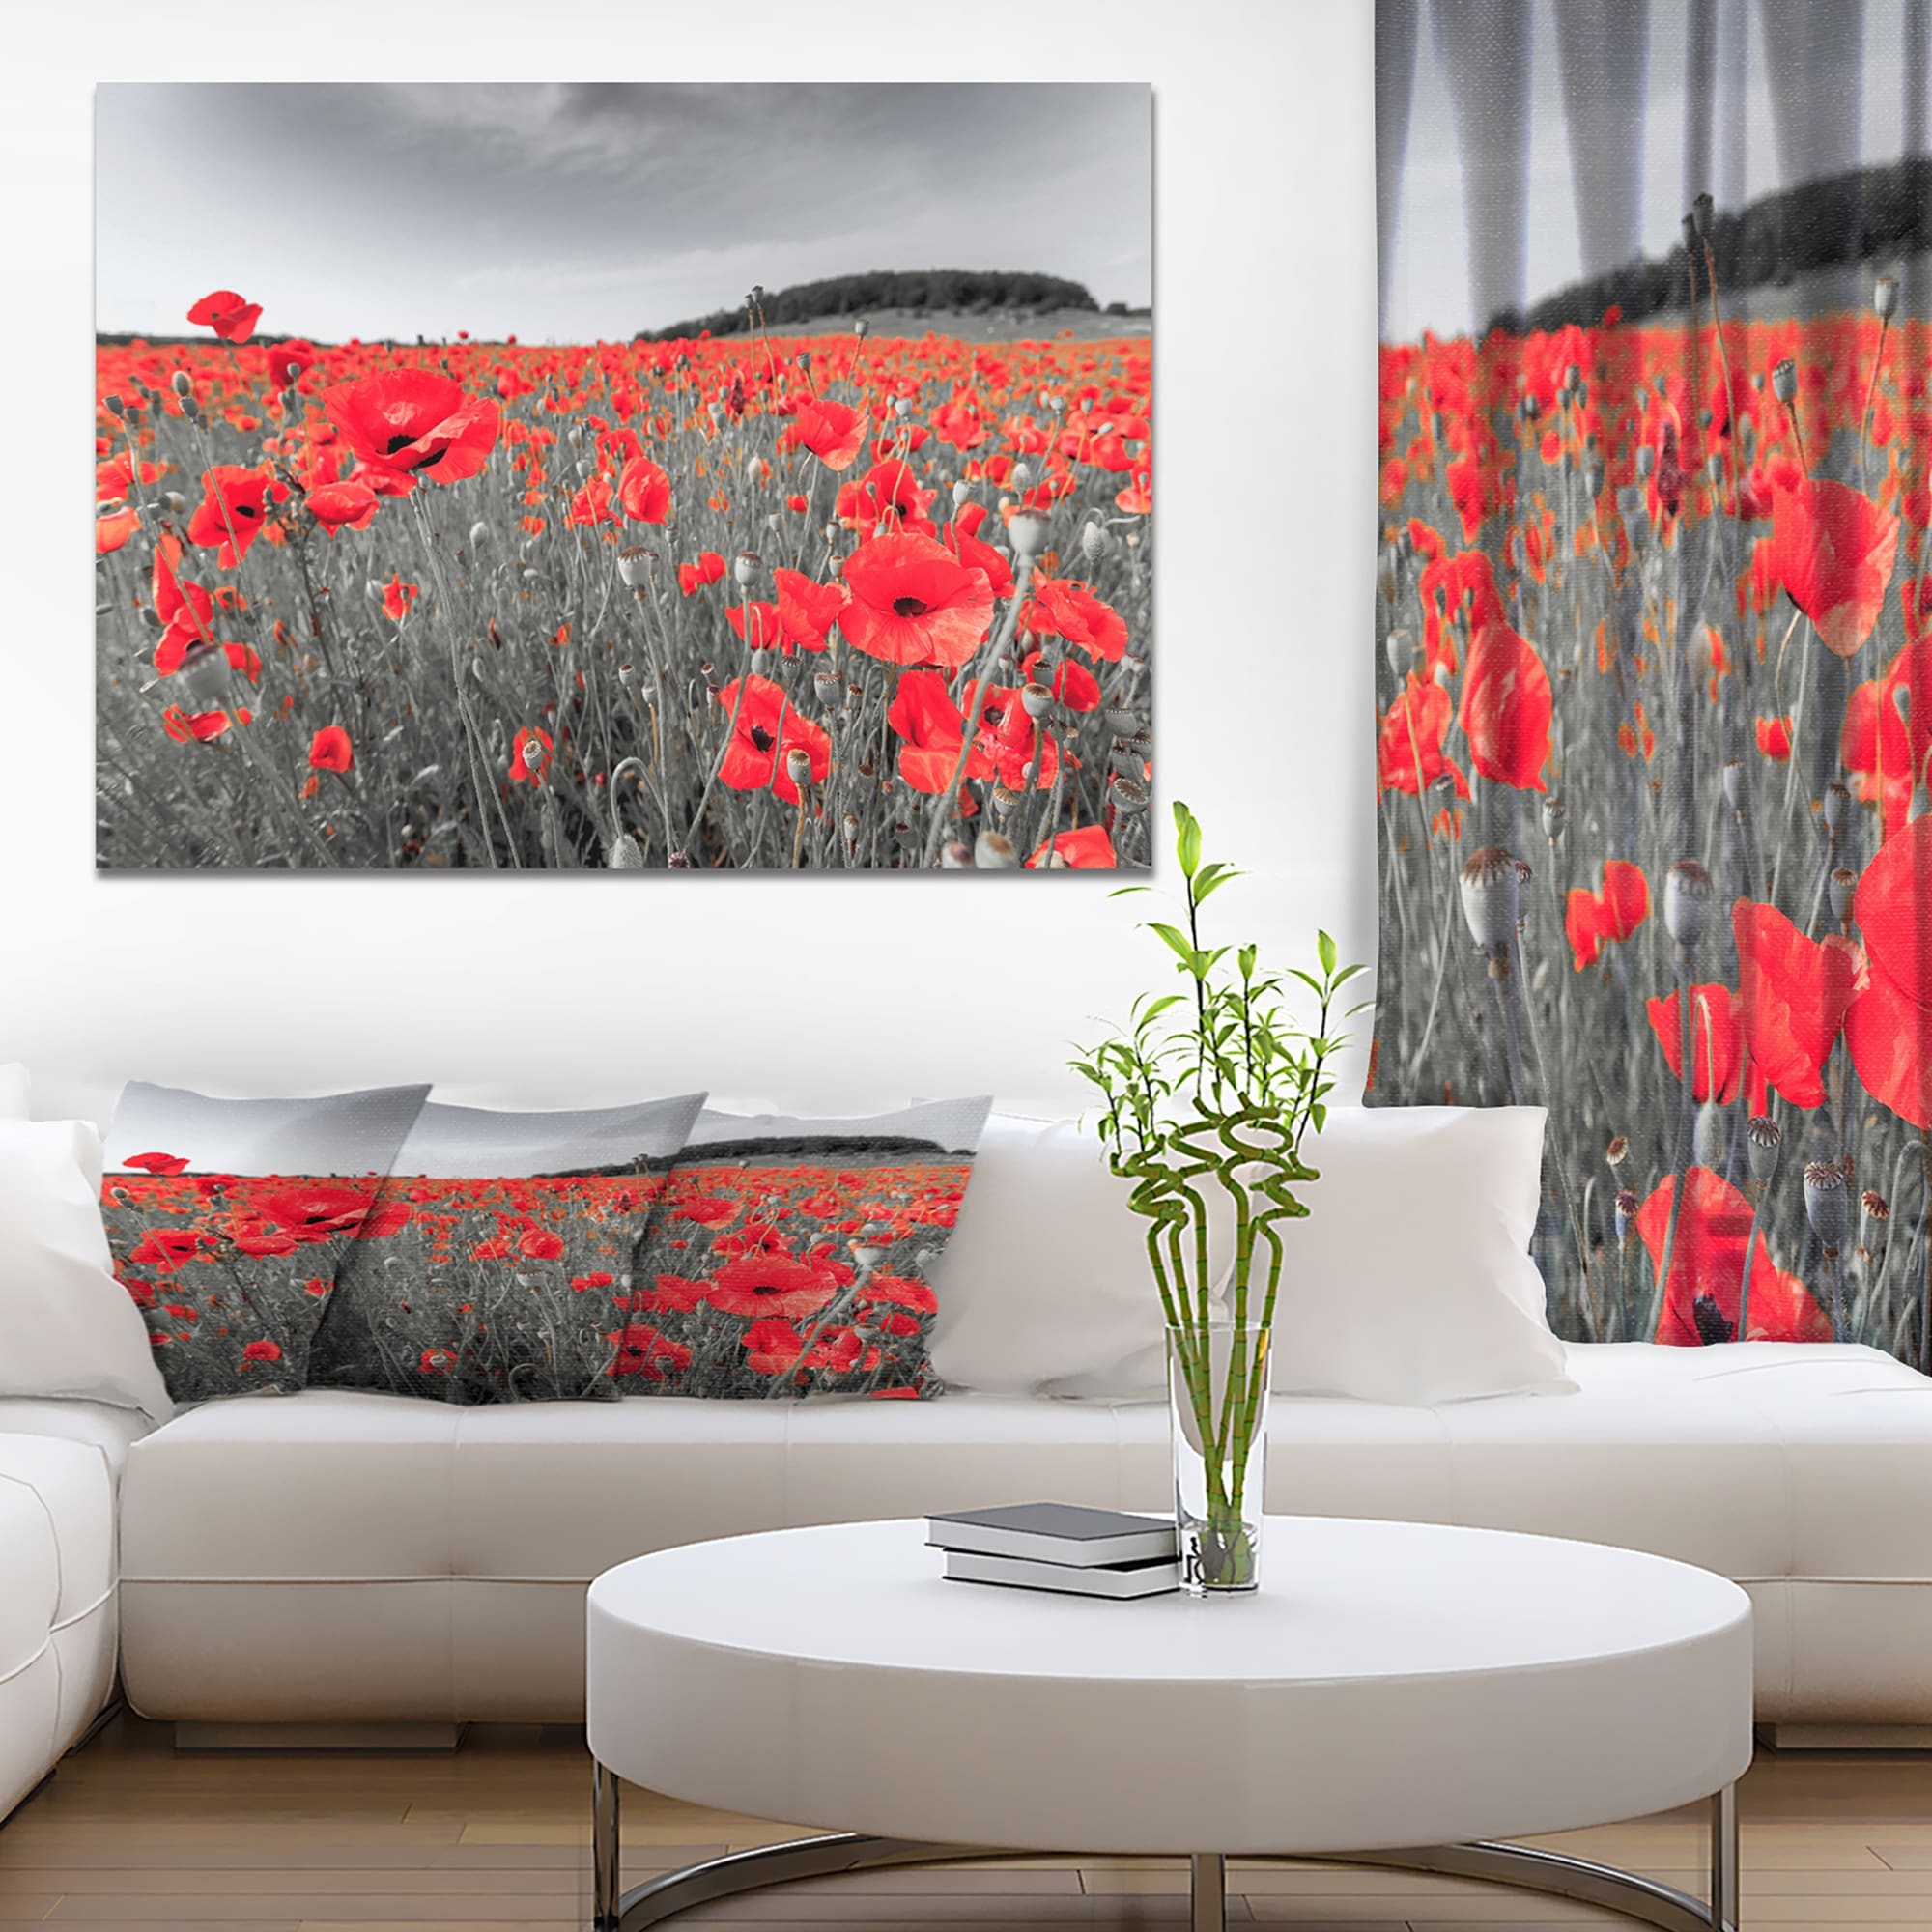 https://ak1.ostkcdn.com/images/products/is/images/direct/36d7c0dd2f5fb940718e852d1d07e987cd11cea2/Designart-%27Red-Poppies-Field%27-Landscapes-Floral-Photographic-on-wrapped-Canvas.jpg